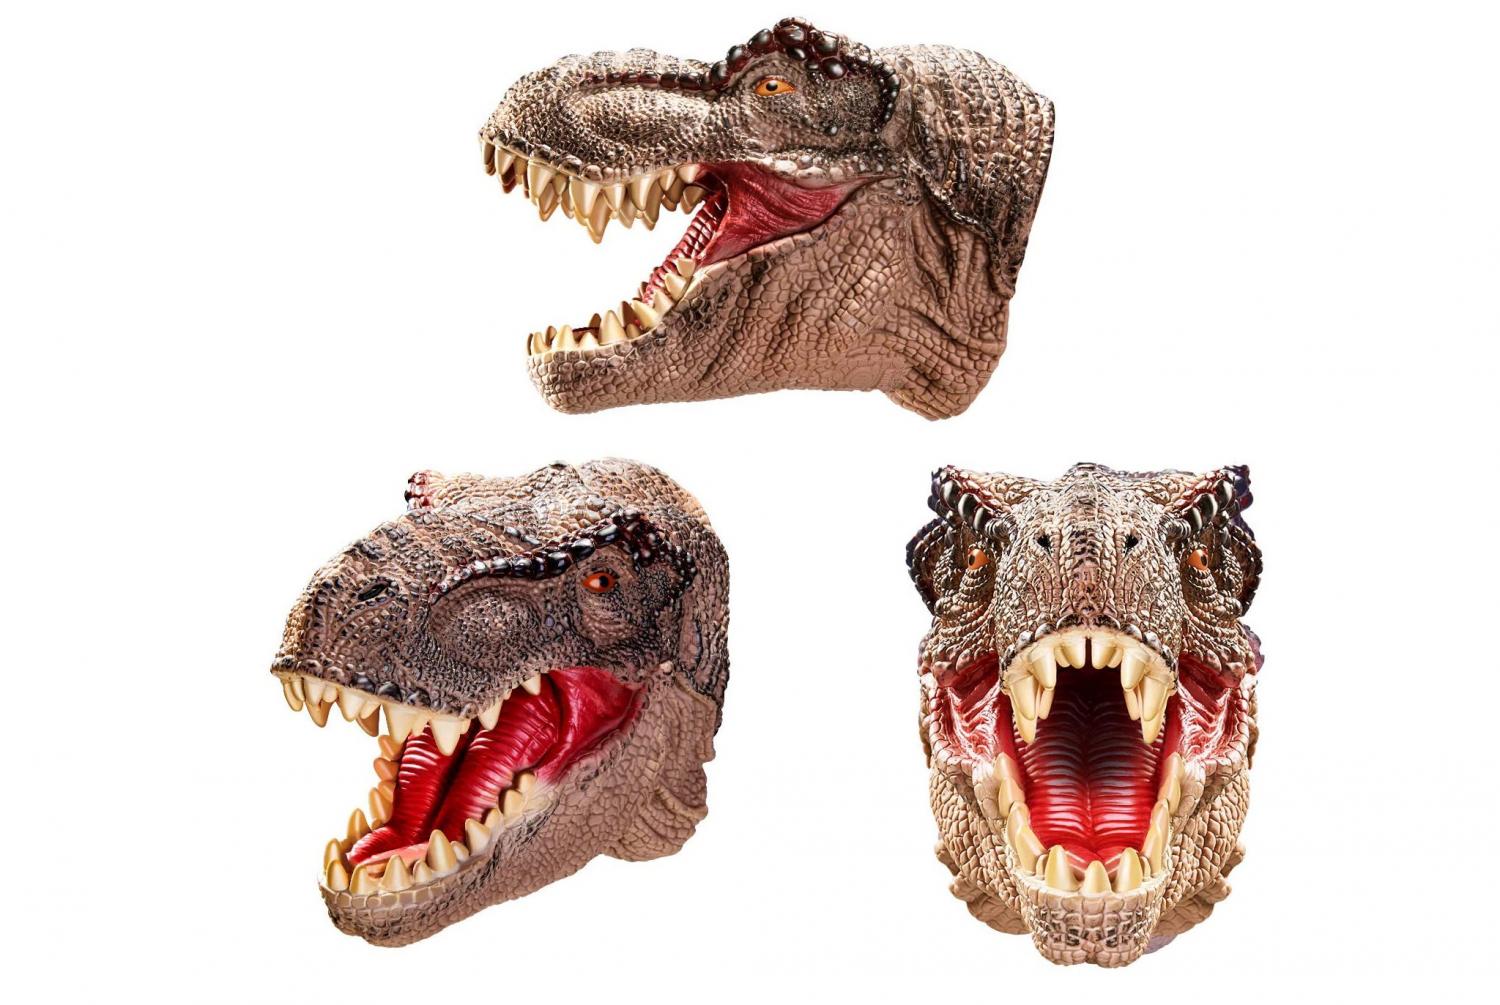 * T-Rex Dinosaur Hand Puppet Details about   DINO BITE Green * Ages 3+ * New * By Toysmith 